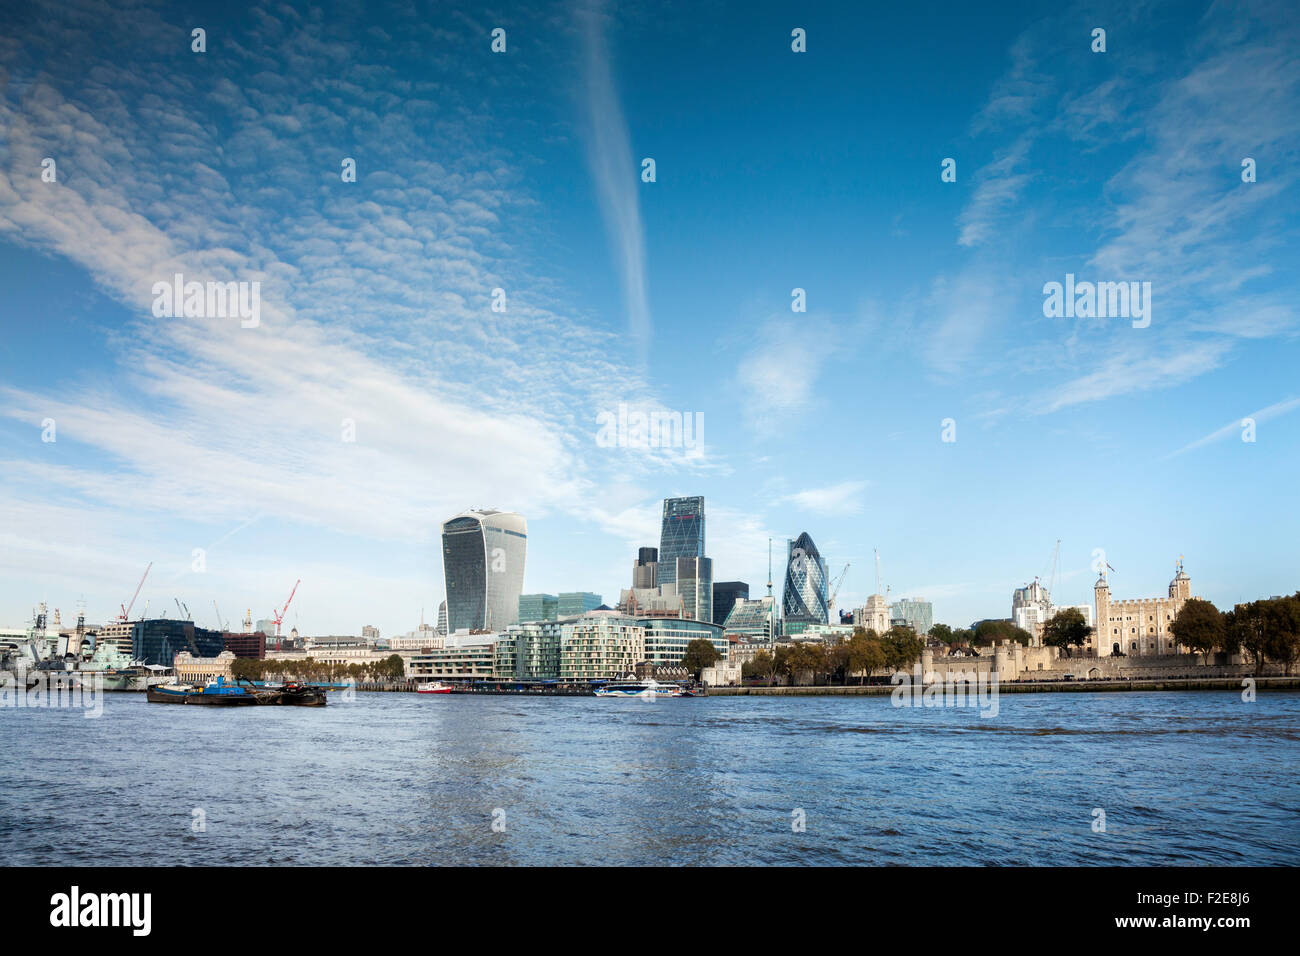 A London skyline image of the North Bank buildings from across the ...